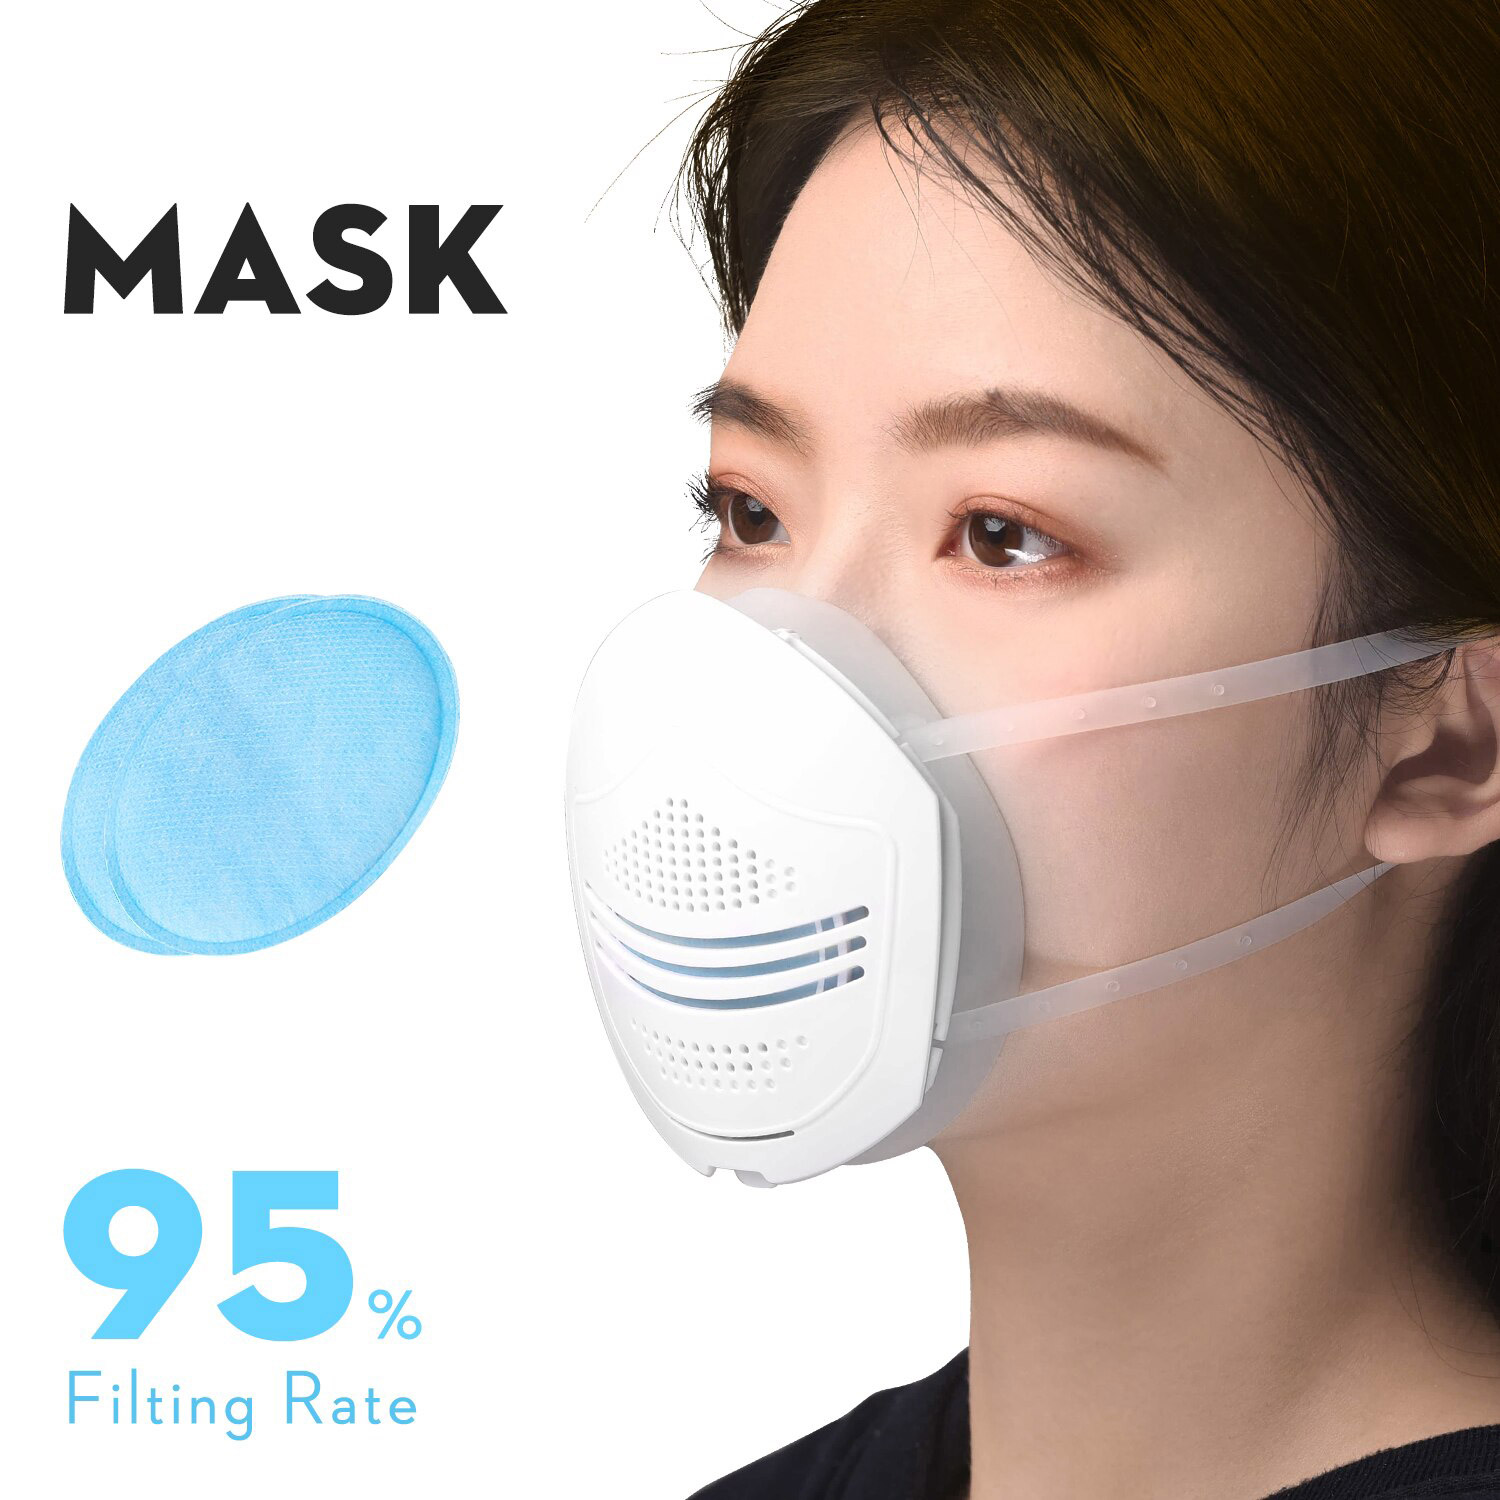 

3PCS Reusable Washable Multi-Function Air Filter Mask Filtration Efficiency 95% With 90PCS Replaceable Filter Element For Anti-Pollution Dust Allergy Haze - White